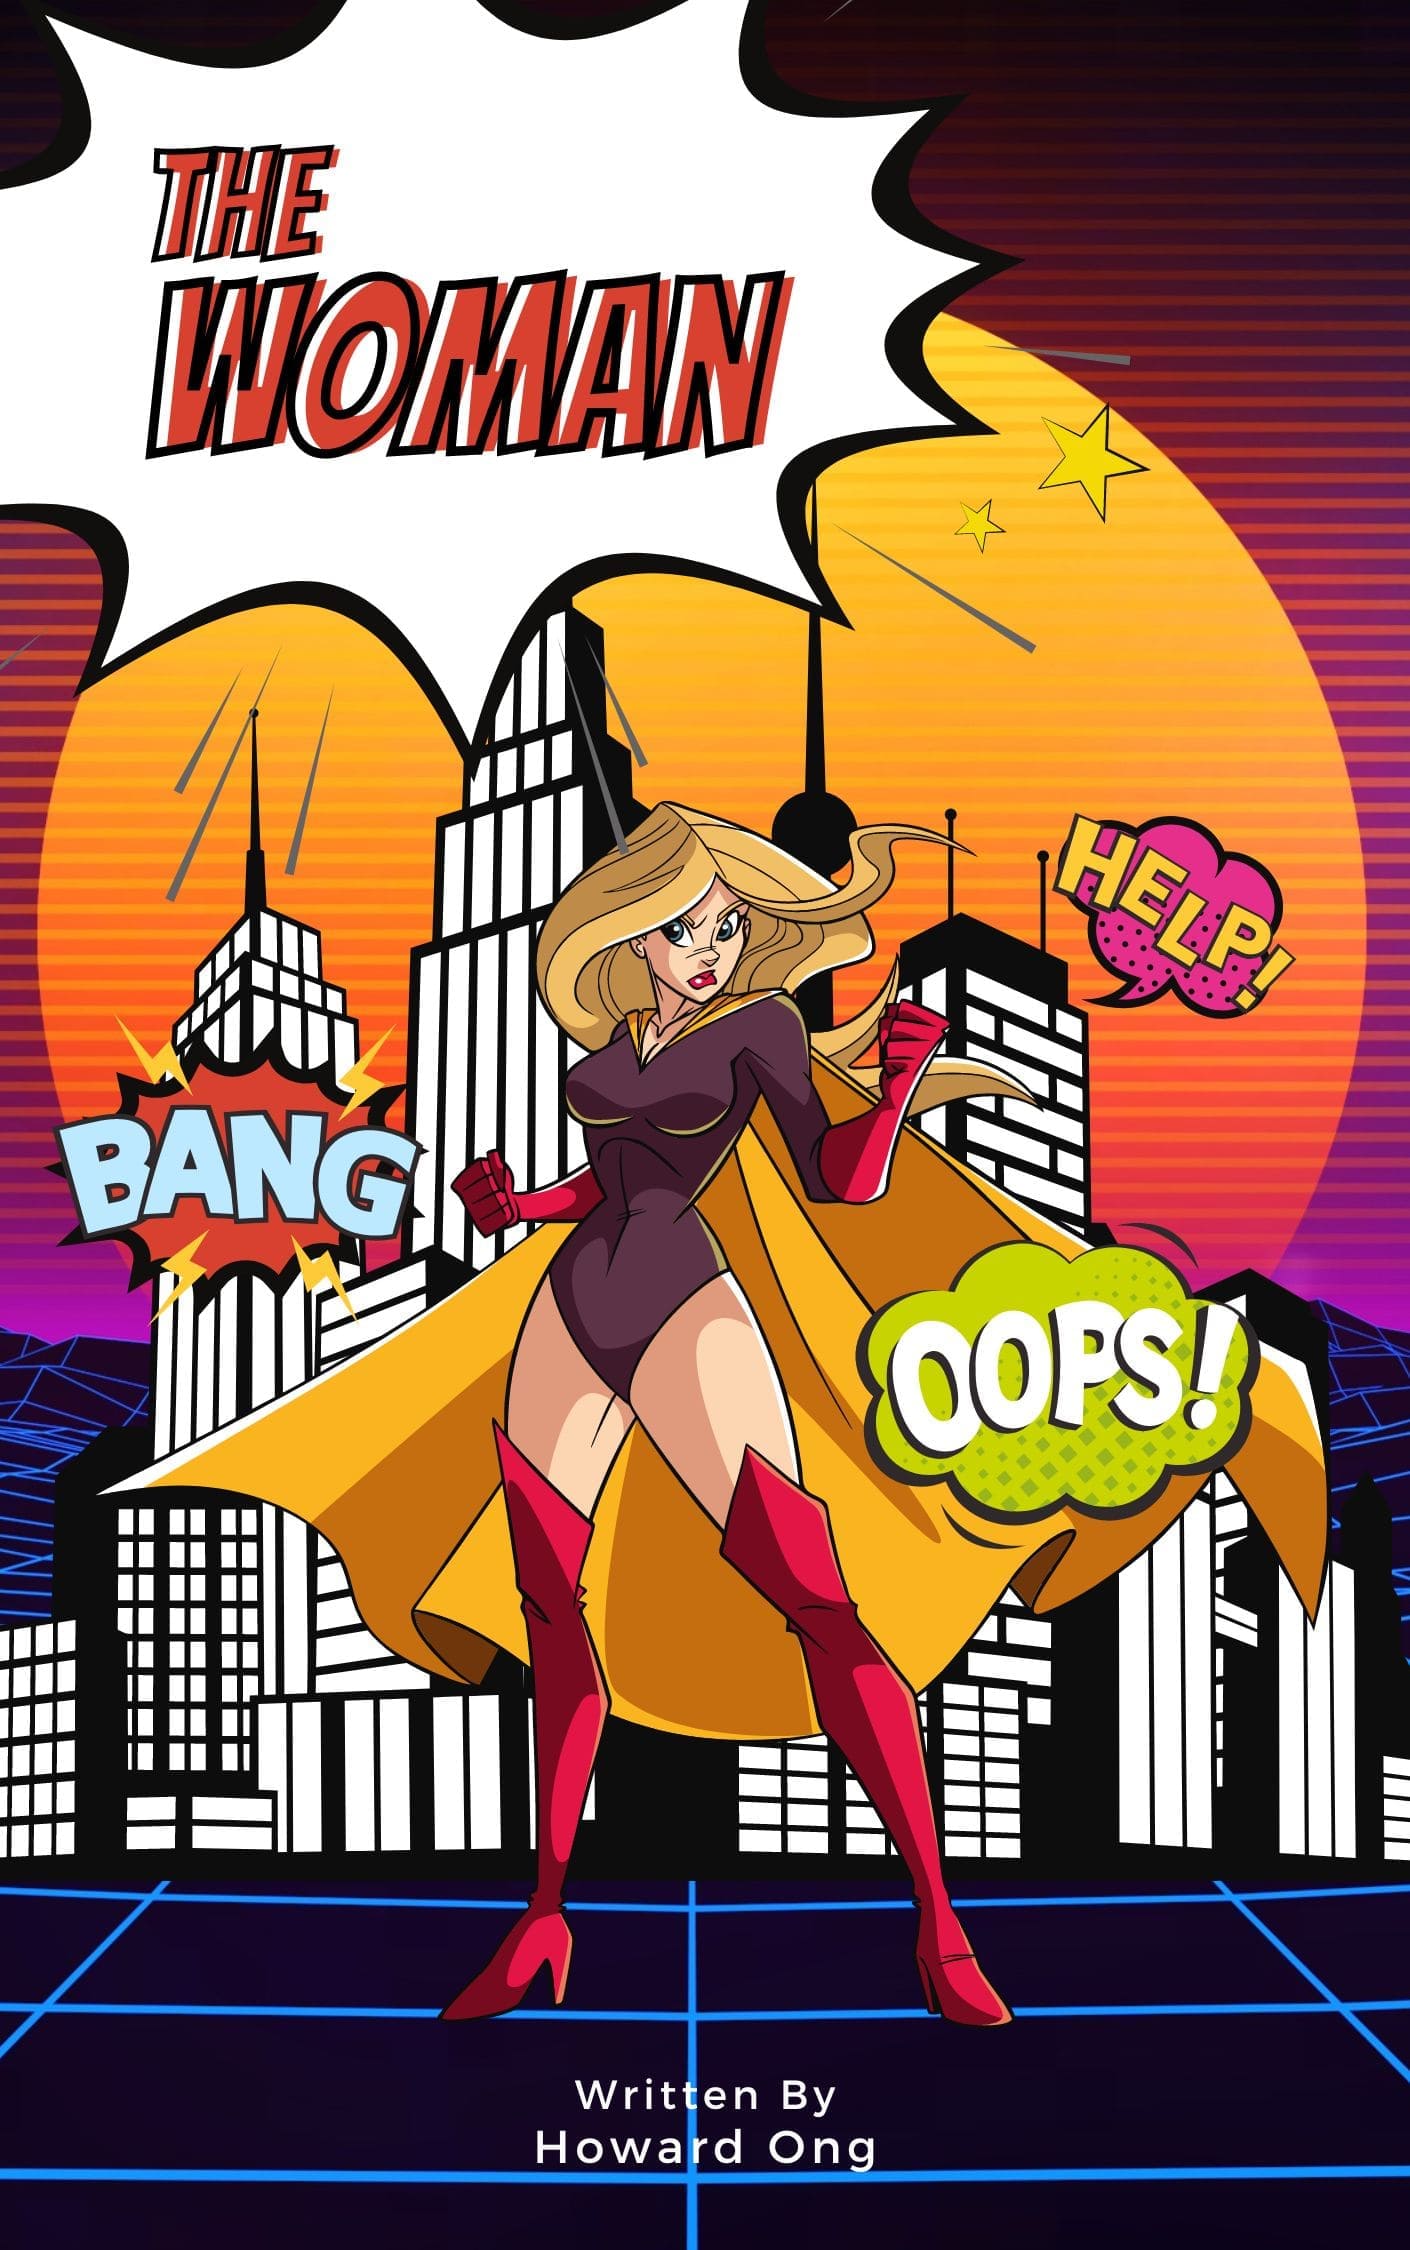 A comic book cover featuring a woman in a captivating pose, ready to embark on an exciting adventure.